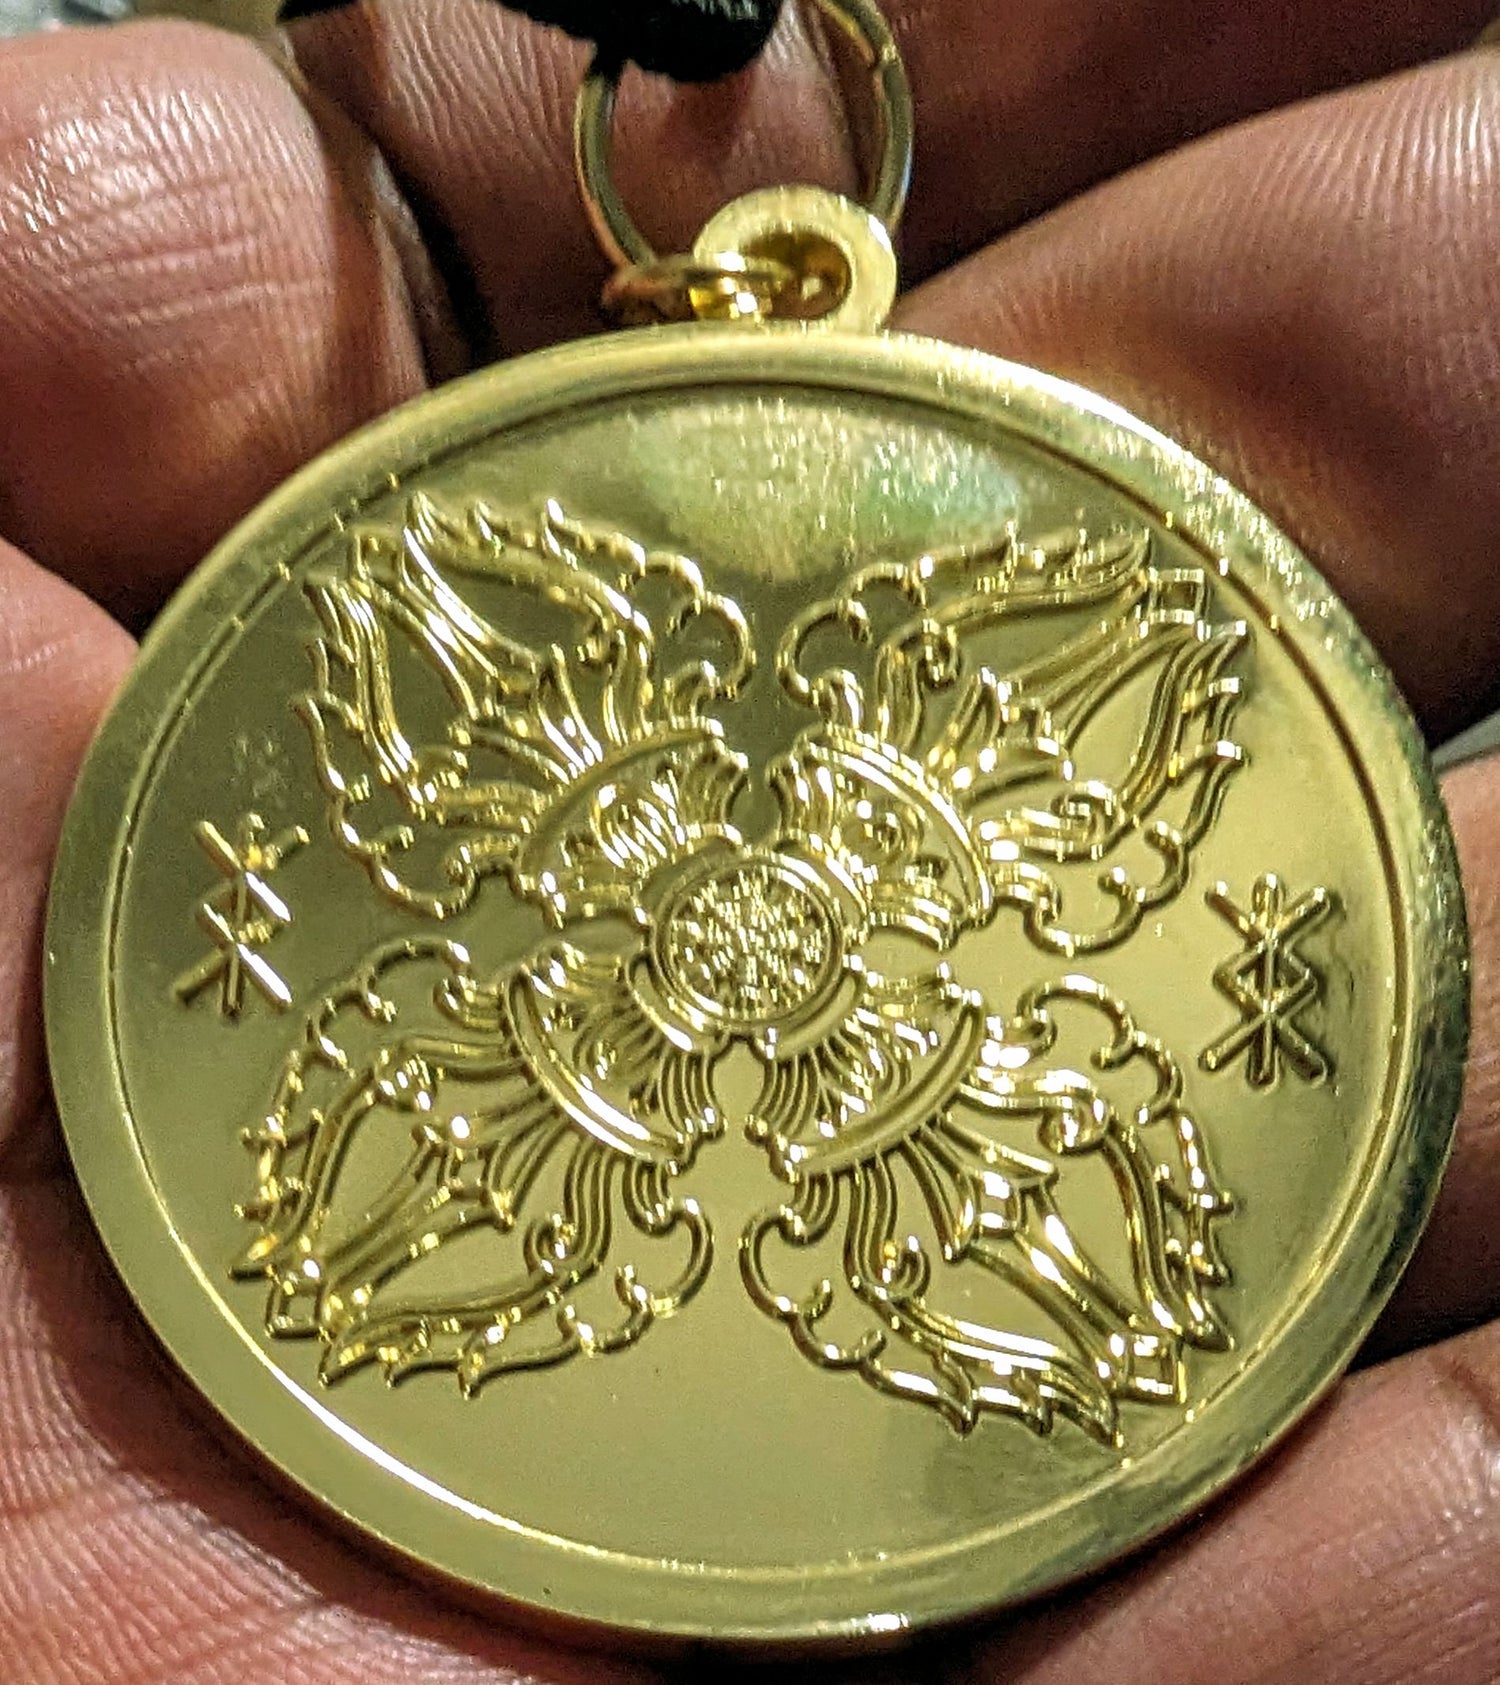 The Reflection Protection Medallion